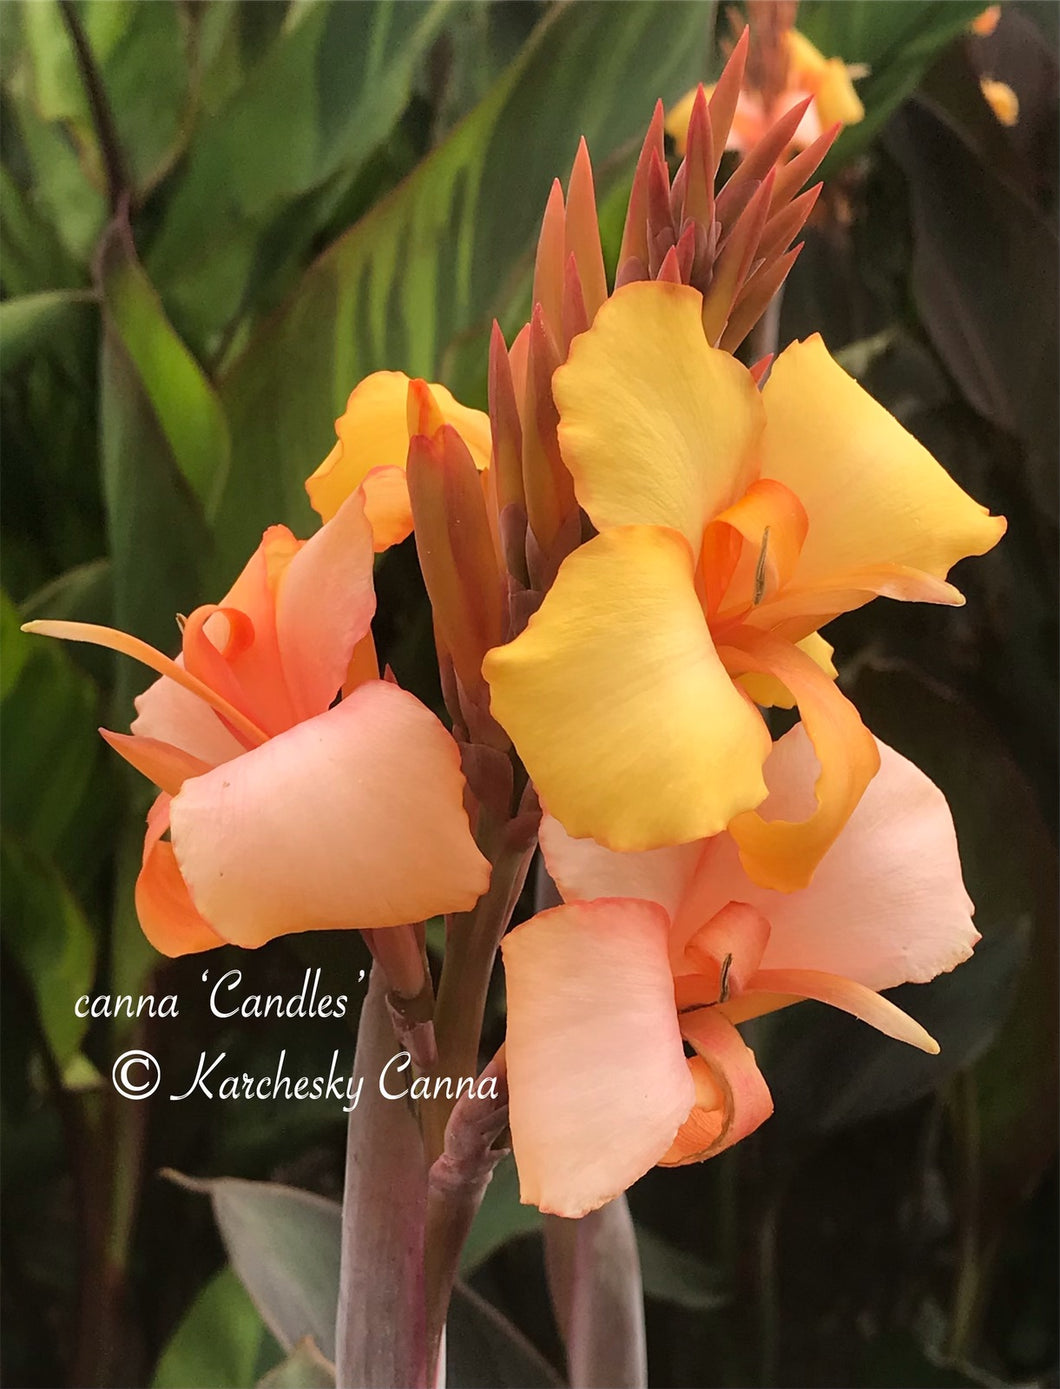 canna 'Candles'